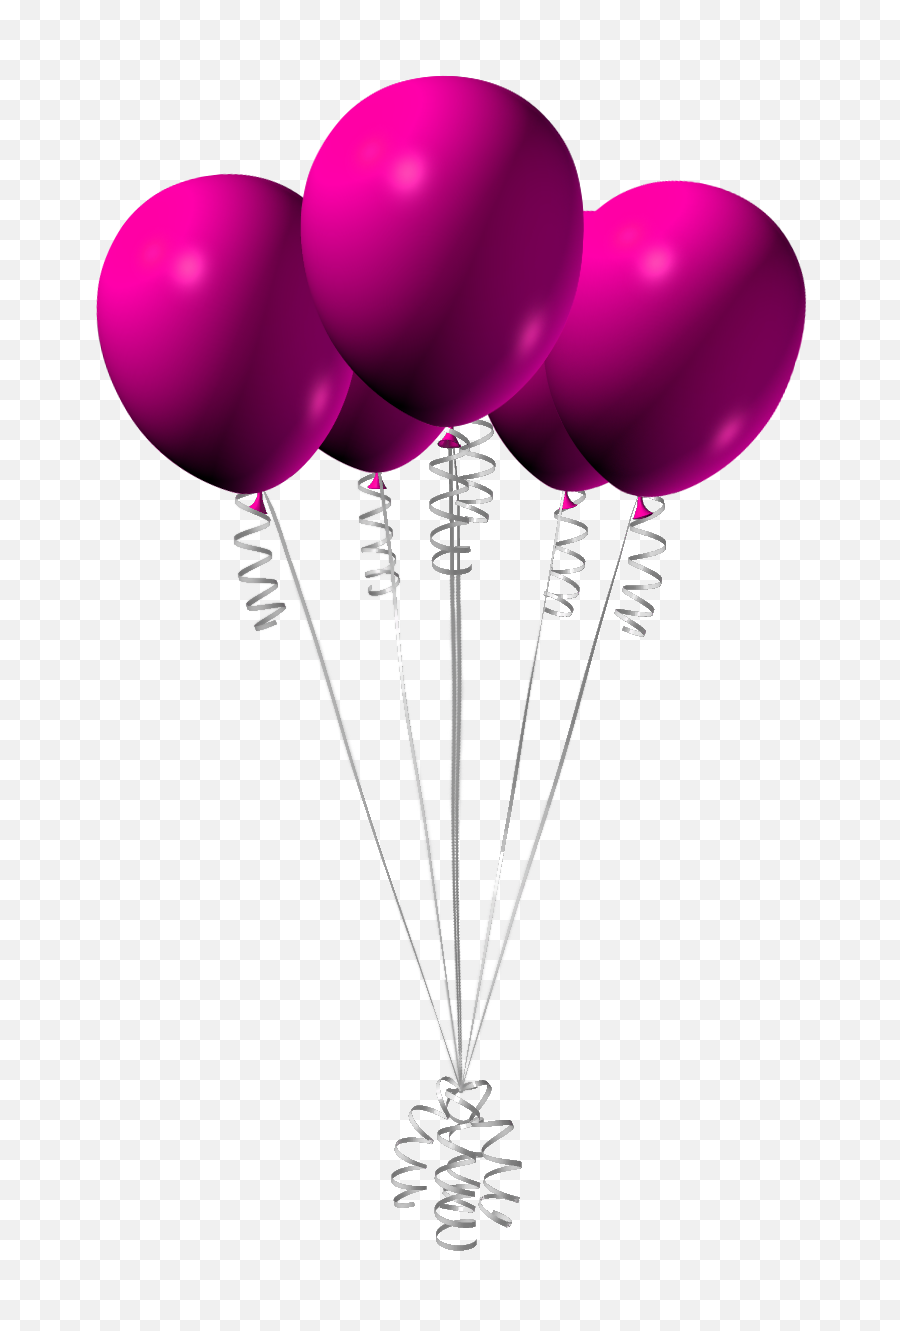 Download Hd Pink Birthday Balloons Png Transparent Image - Pink Balloons Png Transparent Background,Birthday Balloons Png